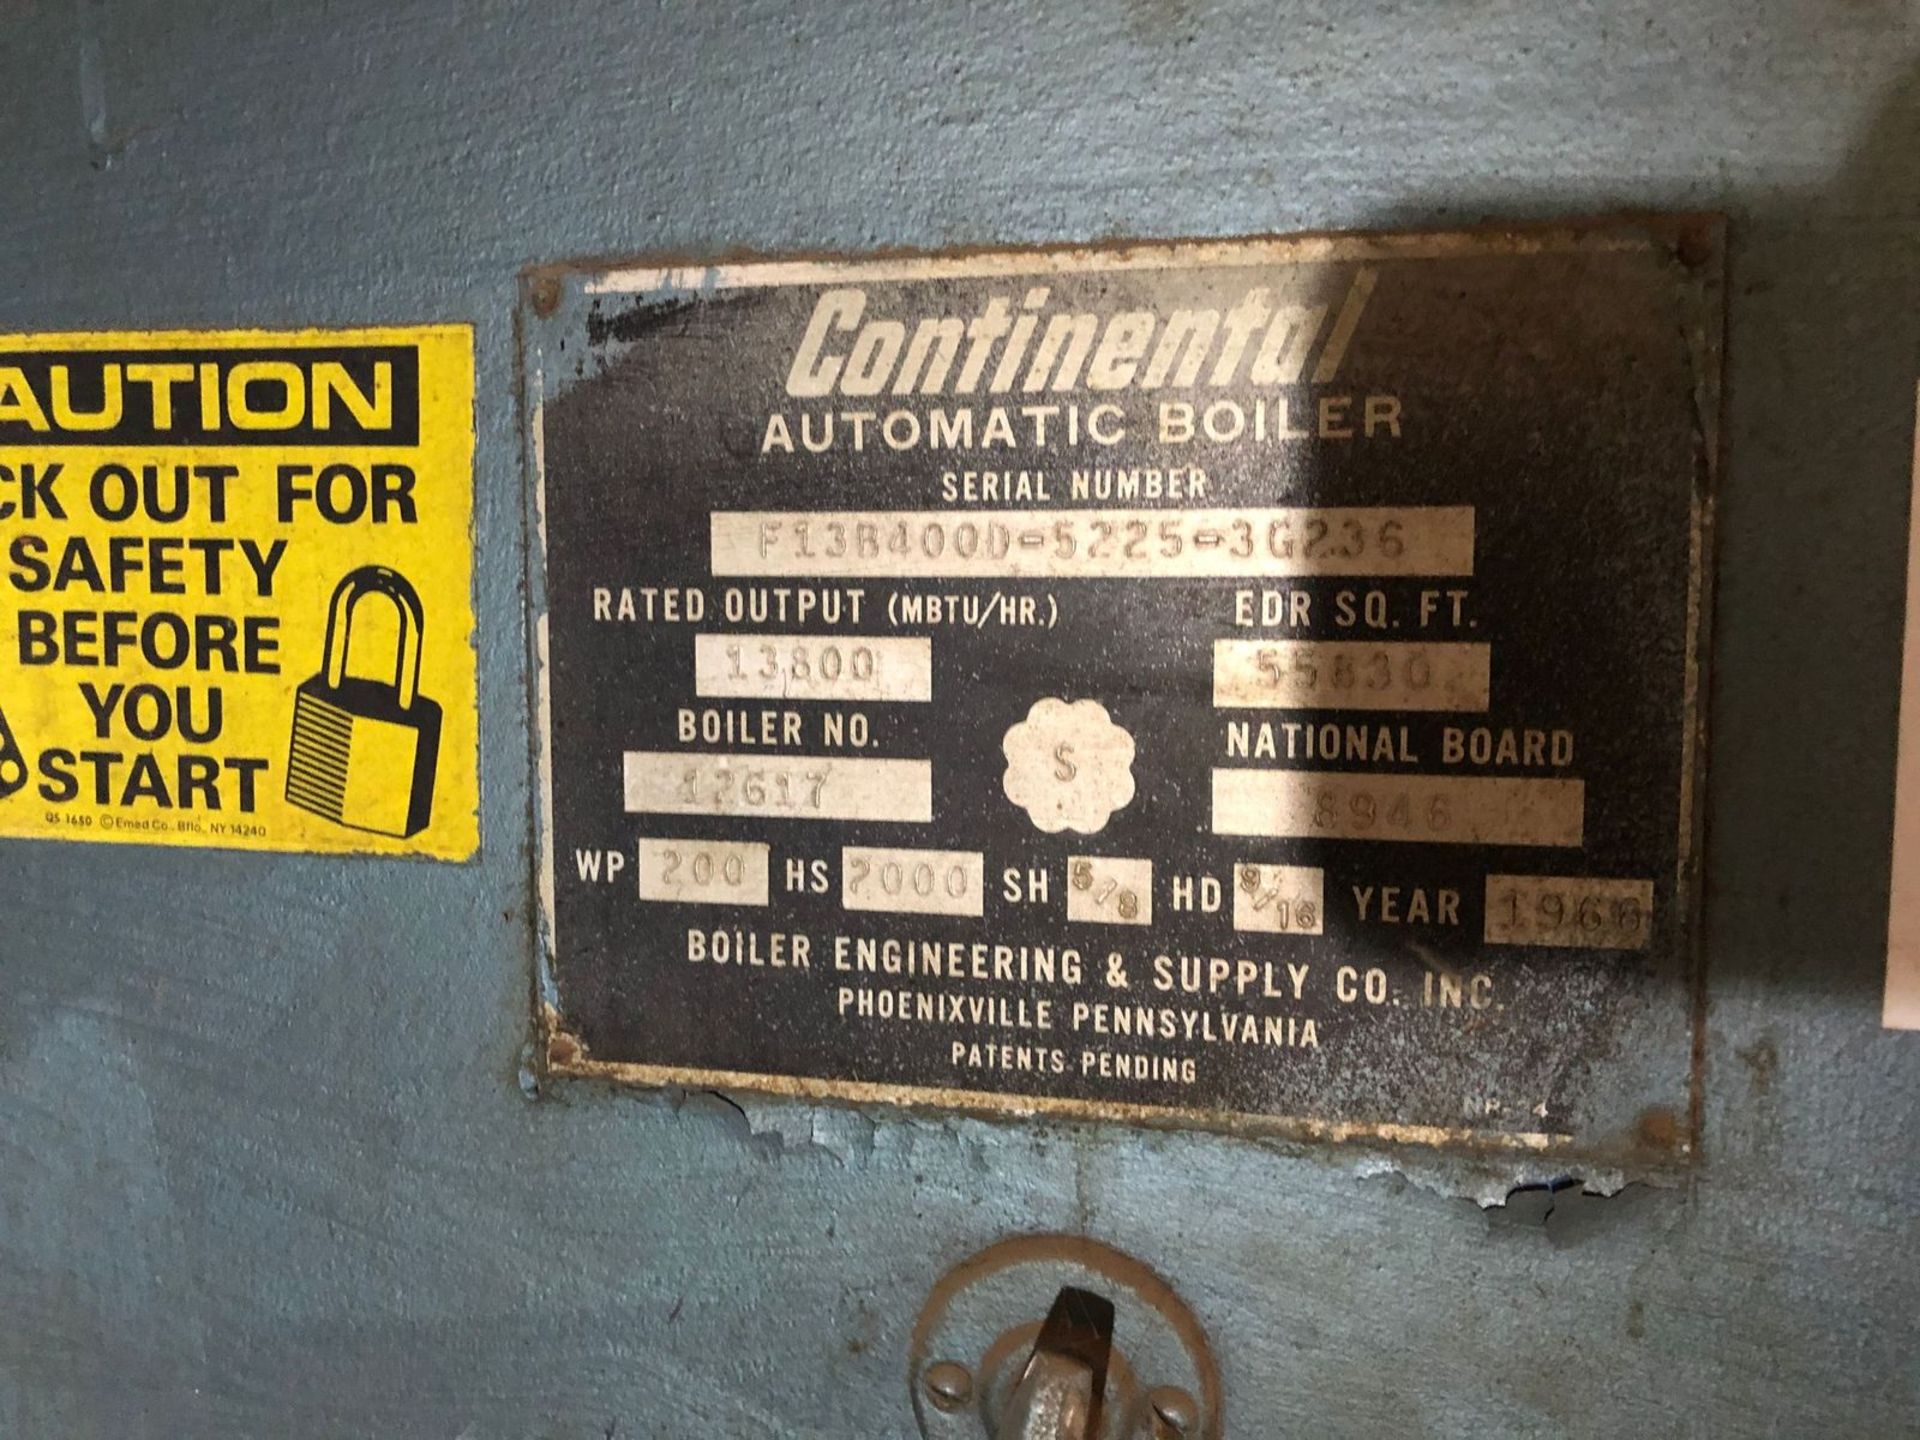 Continental Automatic Boiler, S/N #F13B400D-5225-3G236, Rated Output (MBTU/HR) 13800 - Image 14 of 17